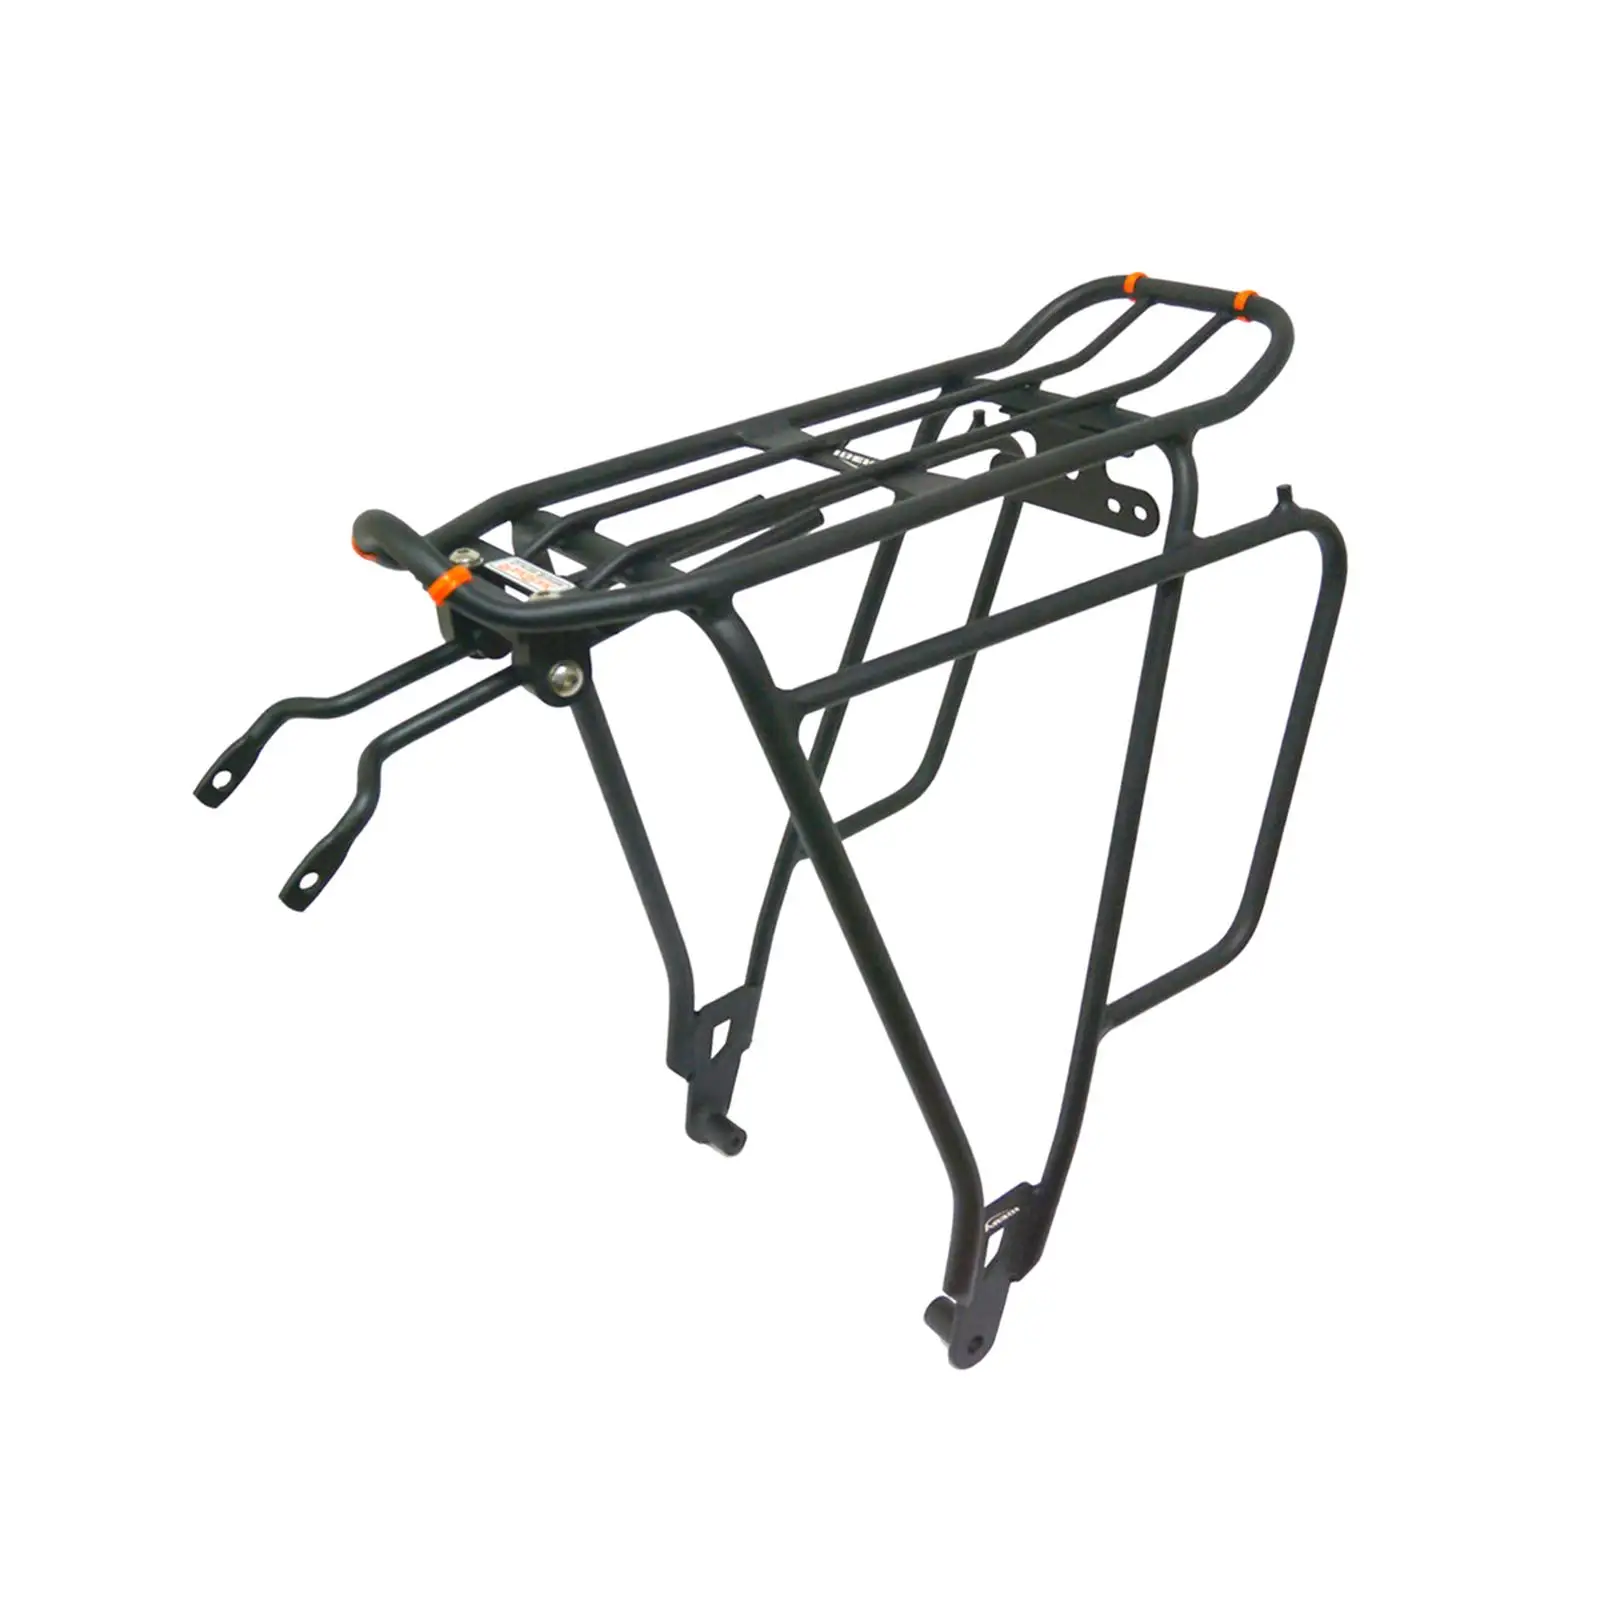 Rear Bike Rack Tailstock Holder Cycling Equipment Bicycle Luggage Carrier Rack for Outdoor Cycling Road Bike Travel Biking